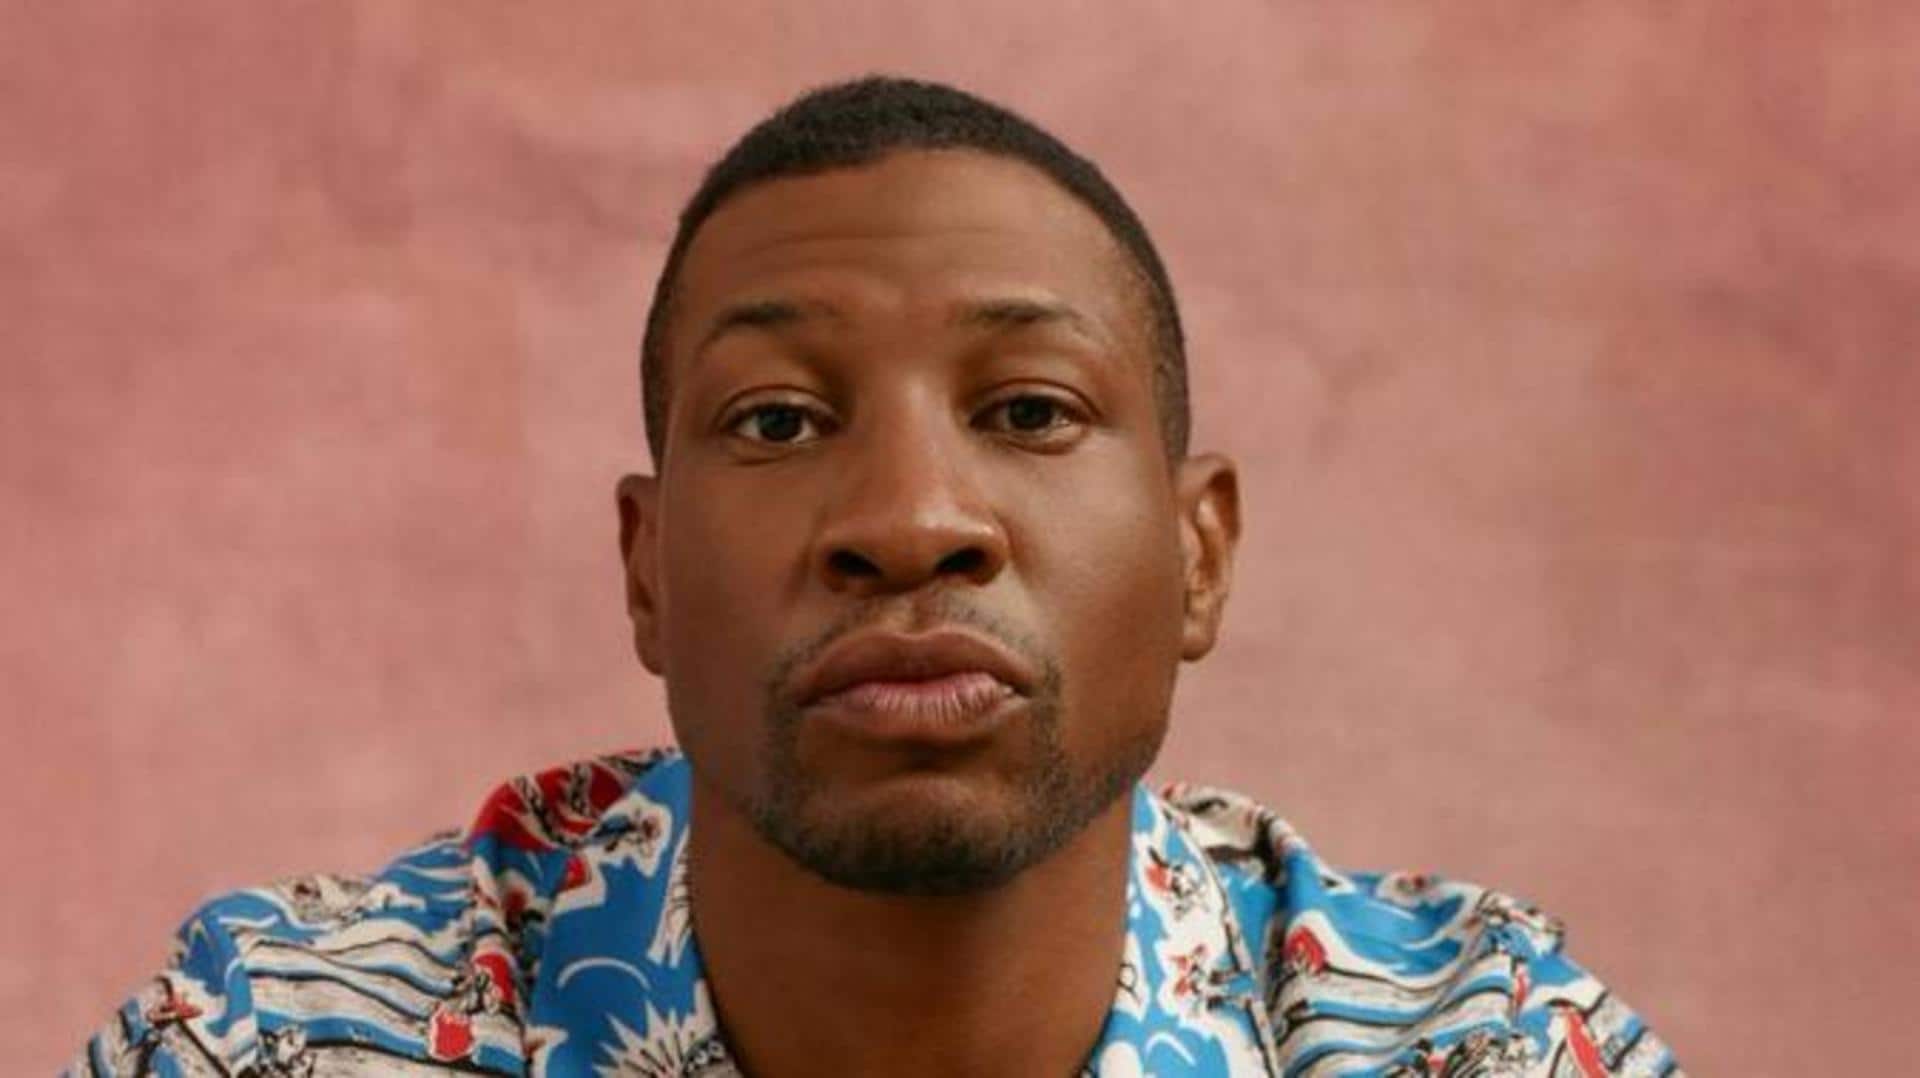 New York: Hollywood actor Jonathan Majors booked on assault charges